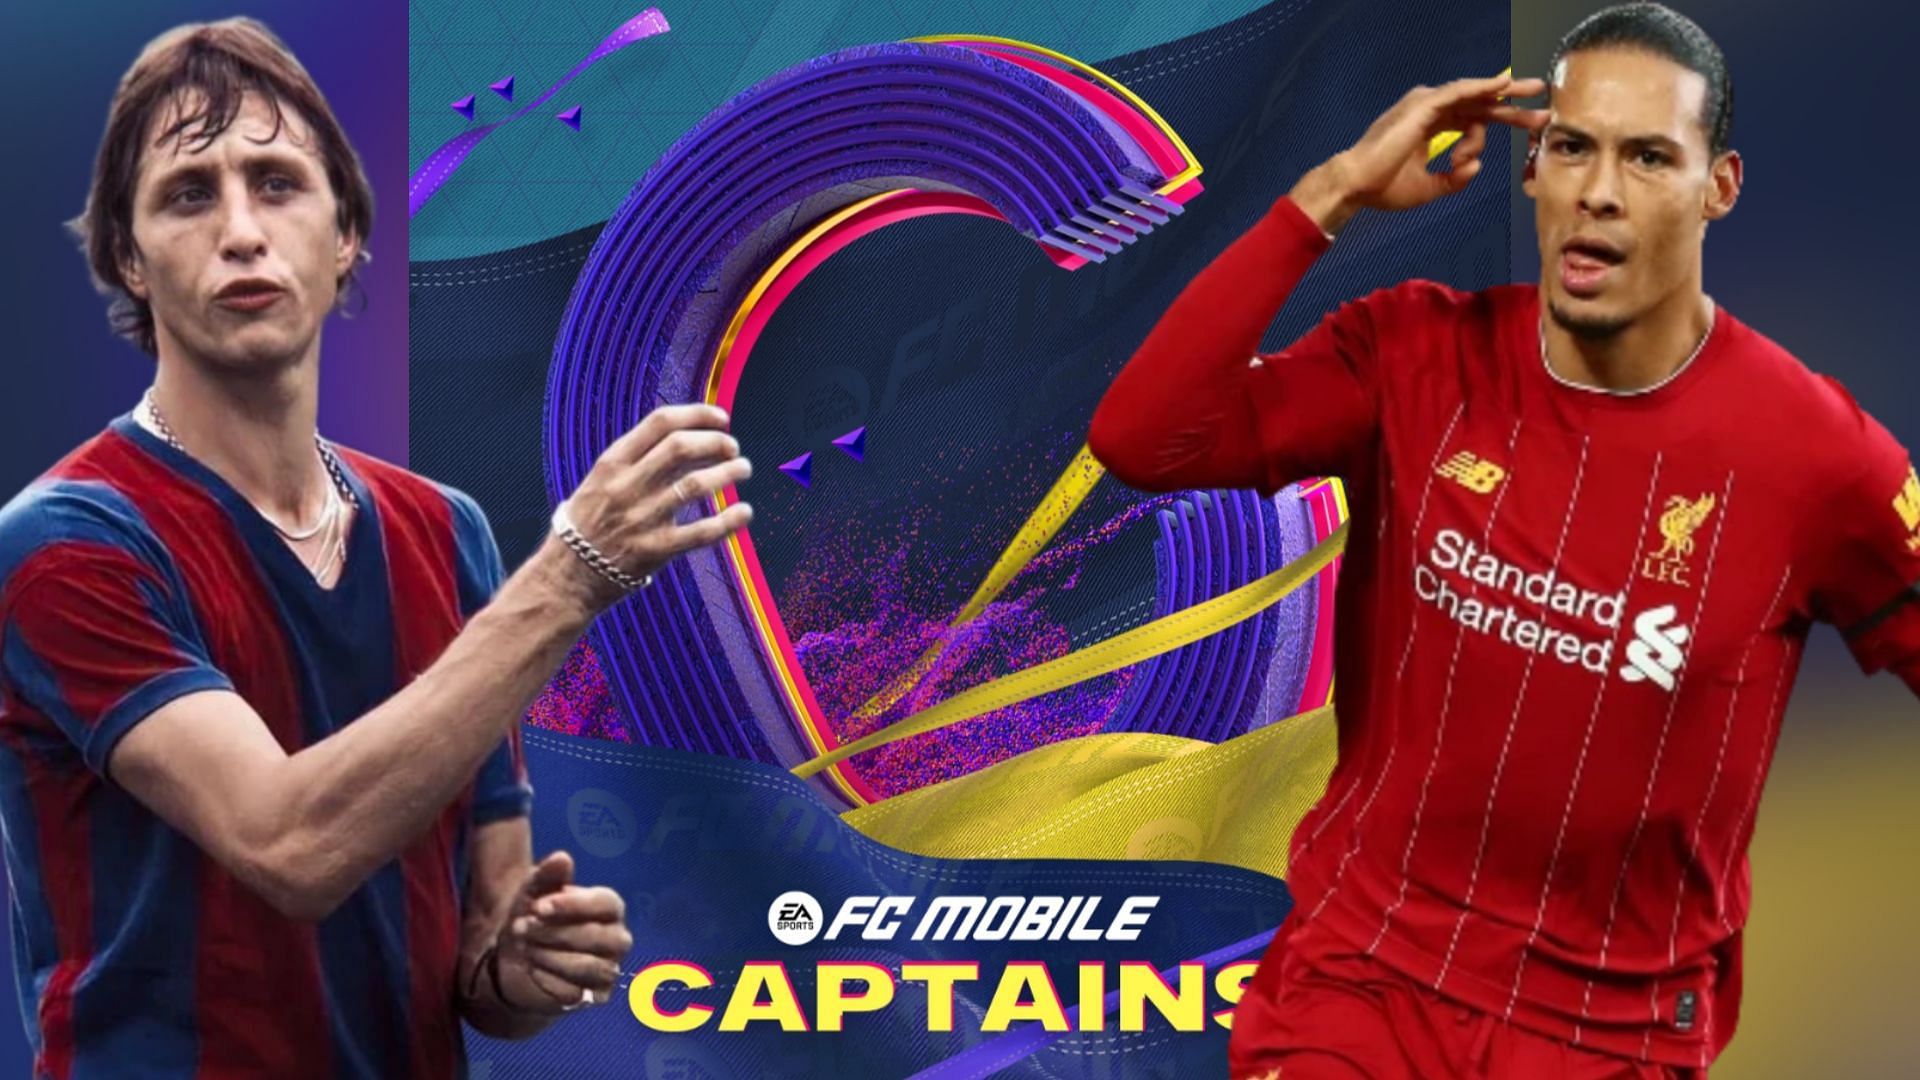 Captains promo will be available in FC Mobile soon